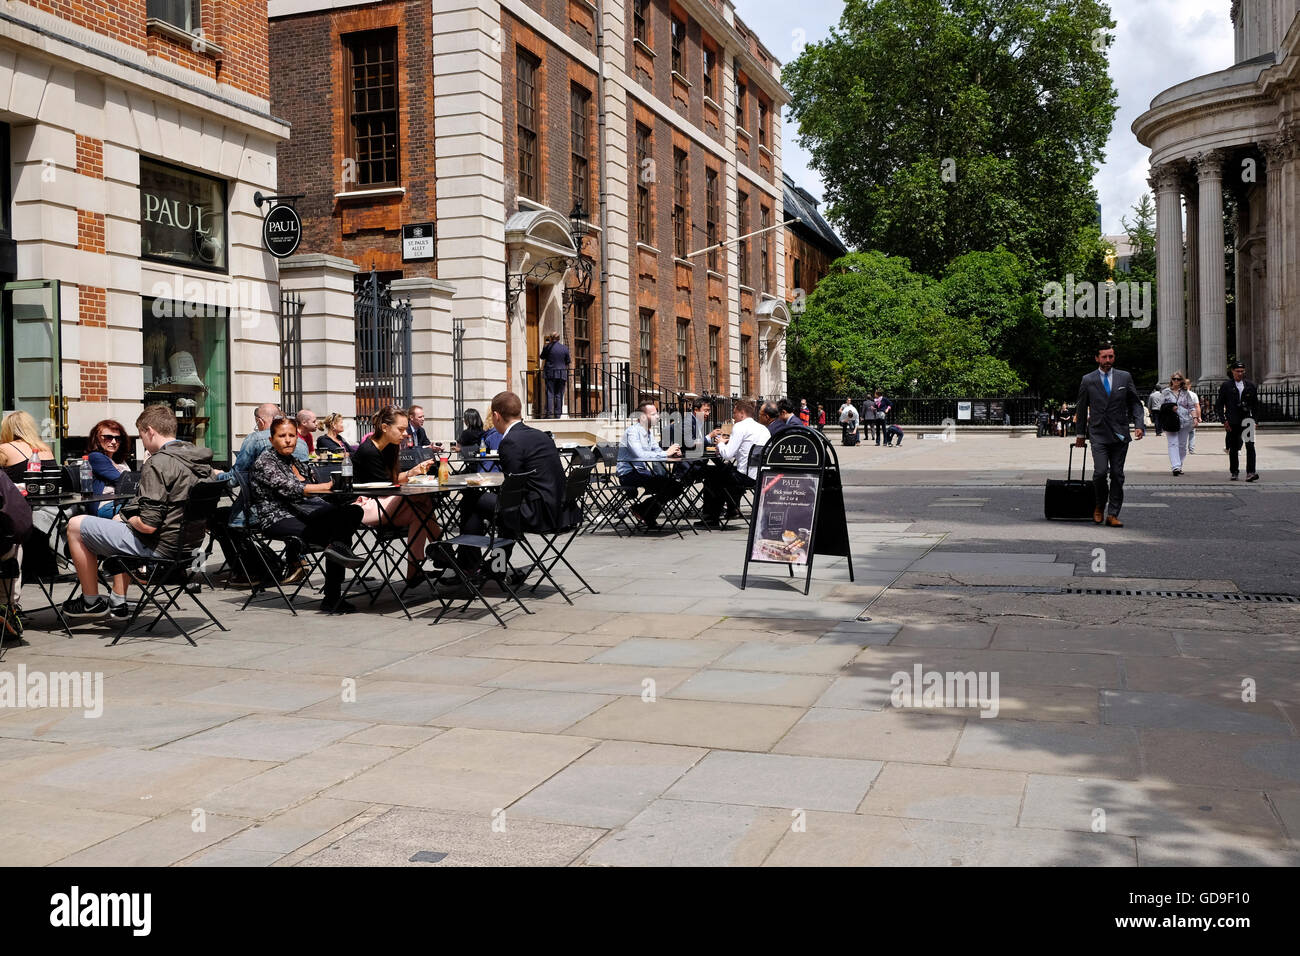 Business people sit and have lunch at a restaurant called Paul outside the St Paul's Cathedral London Stock Photo